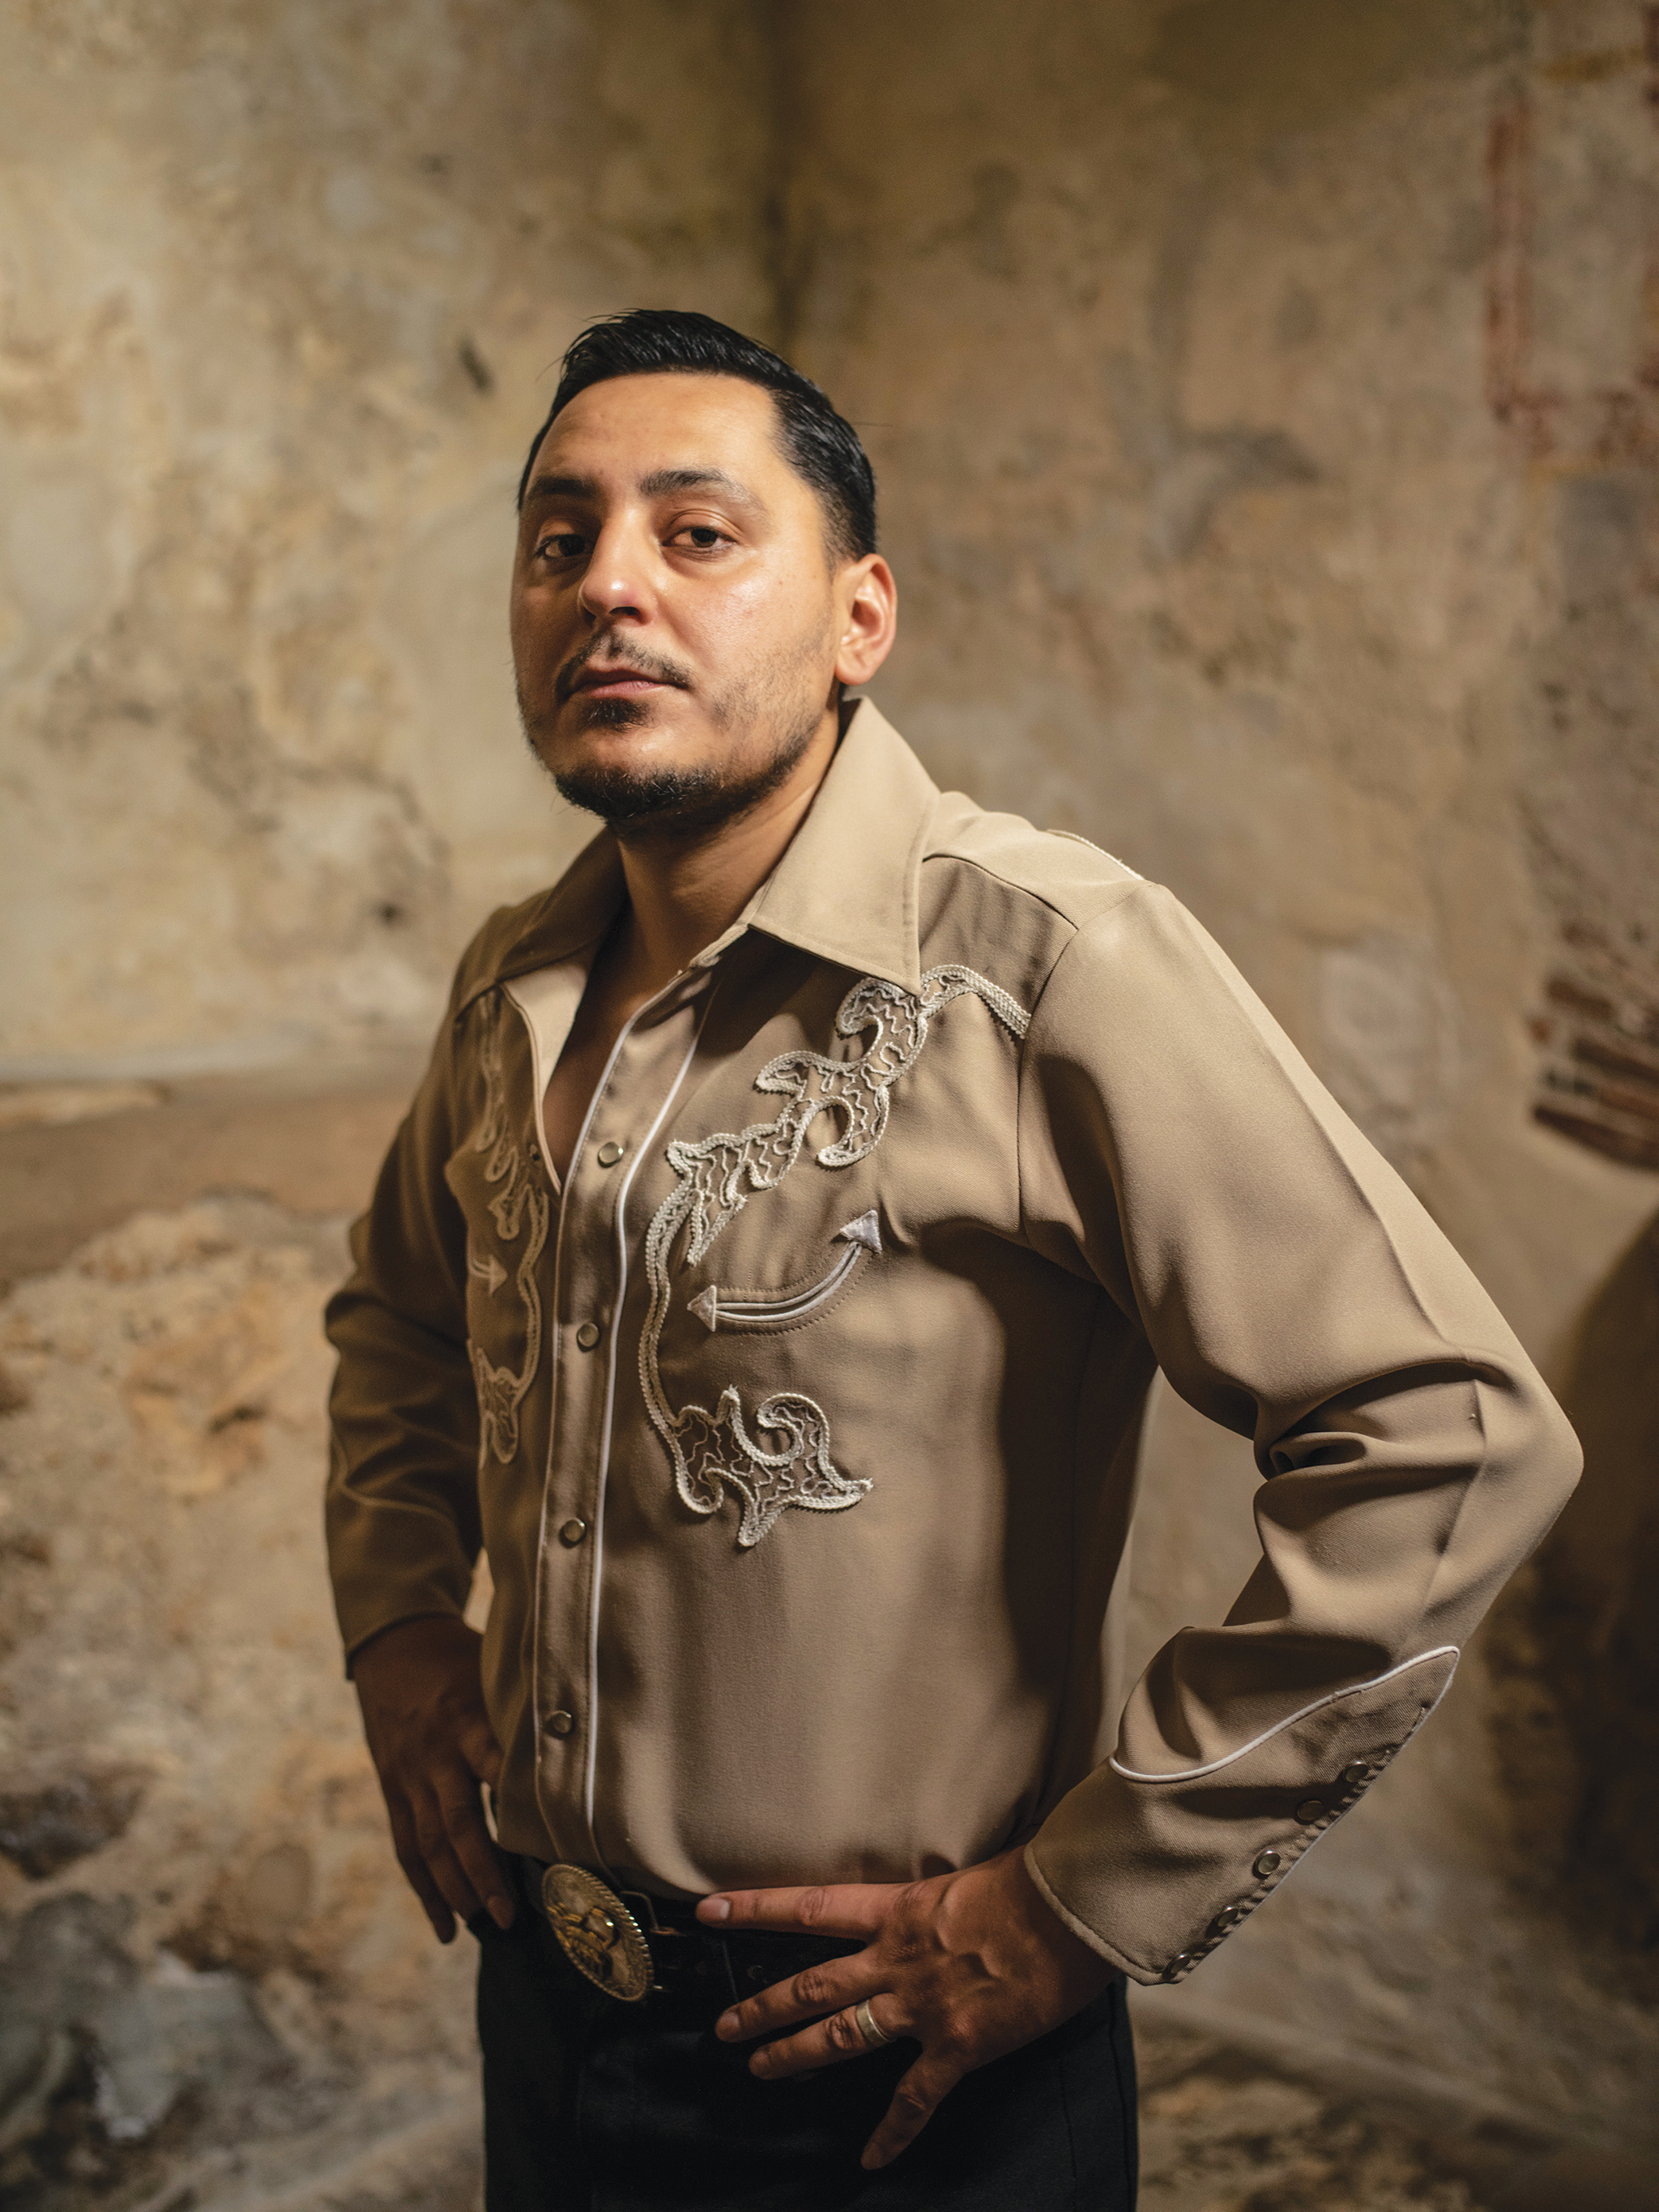 "I always say that if your work doesn't cause any type of reaction, there's something wrong with it," says artist Jose Villalobos, photographed inside San Antonio's Mission Concepción.